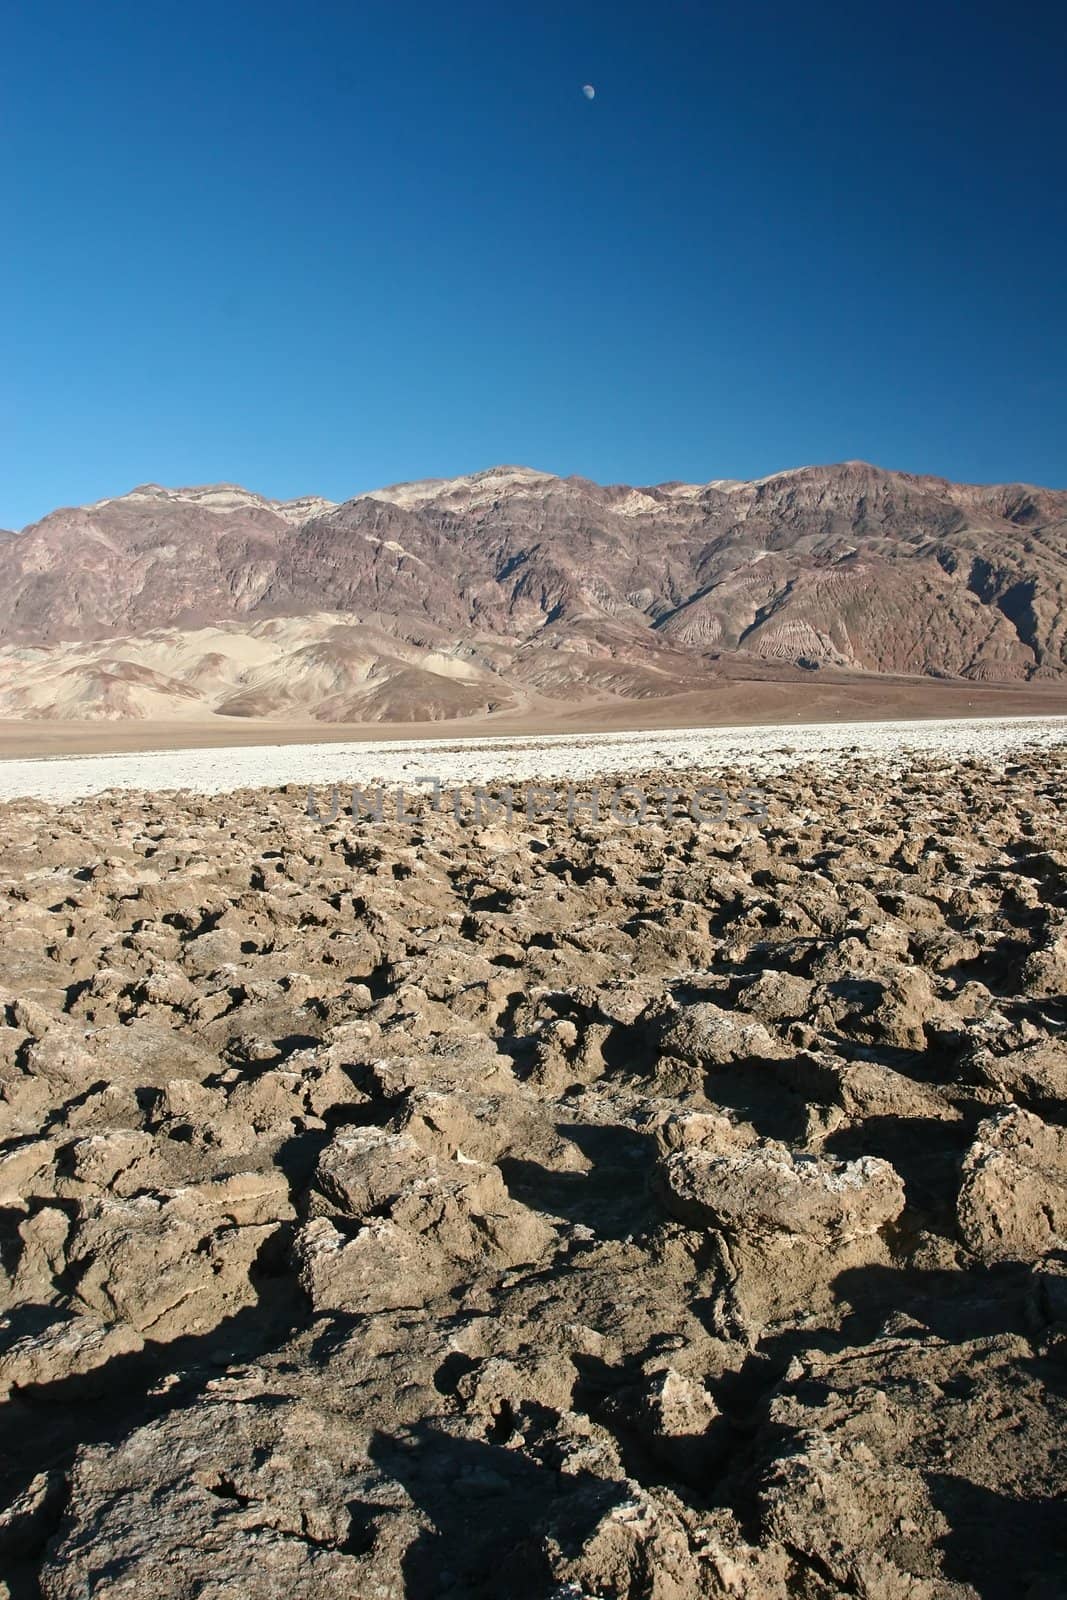 Badwater is a basin in California's Death Valley, noted as the lowest point in North America, with an elevation of 282 feet (86.0 m) below sea level.